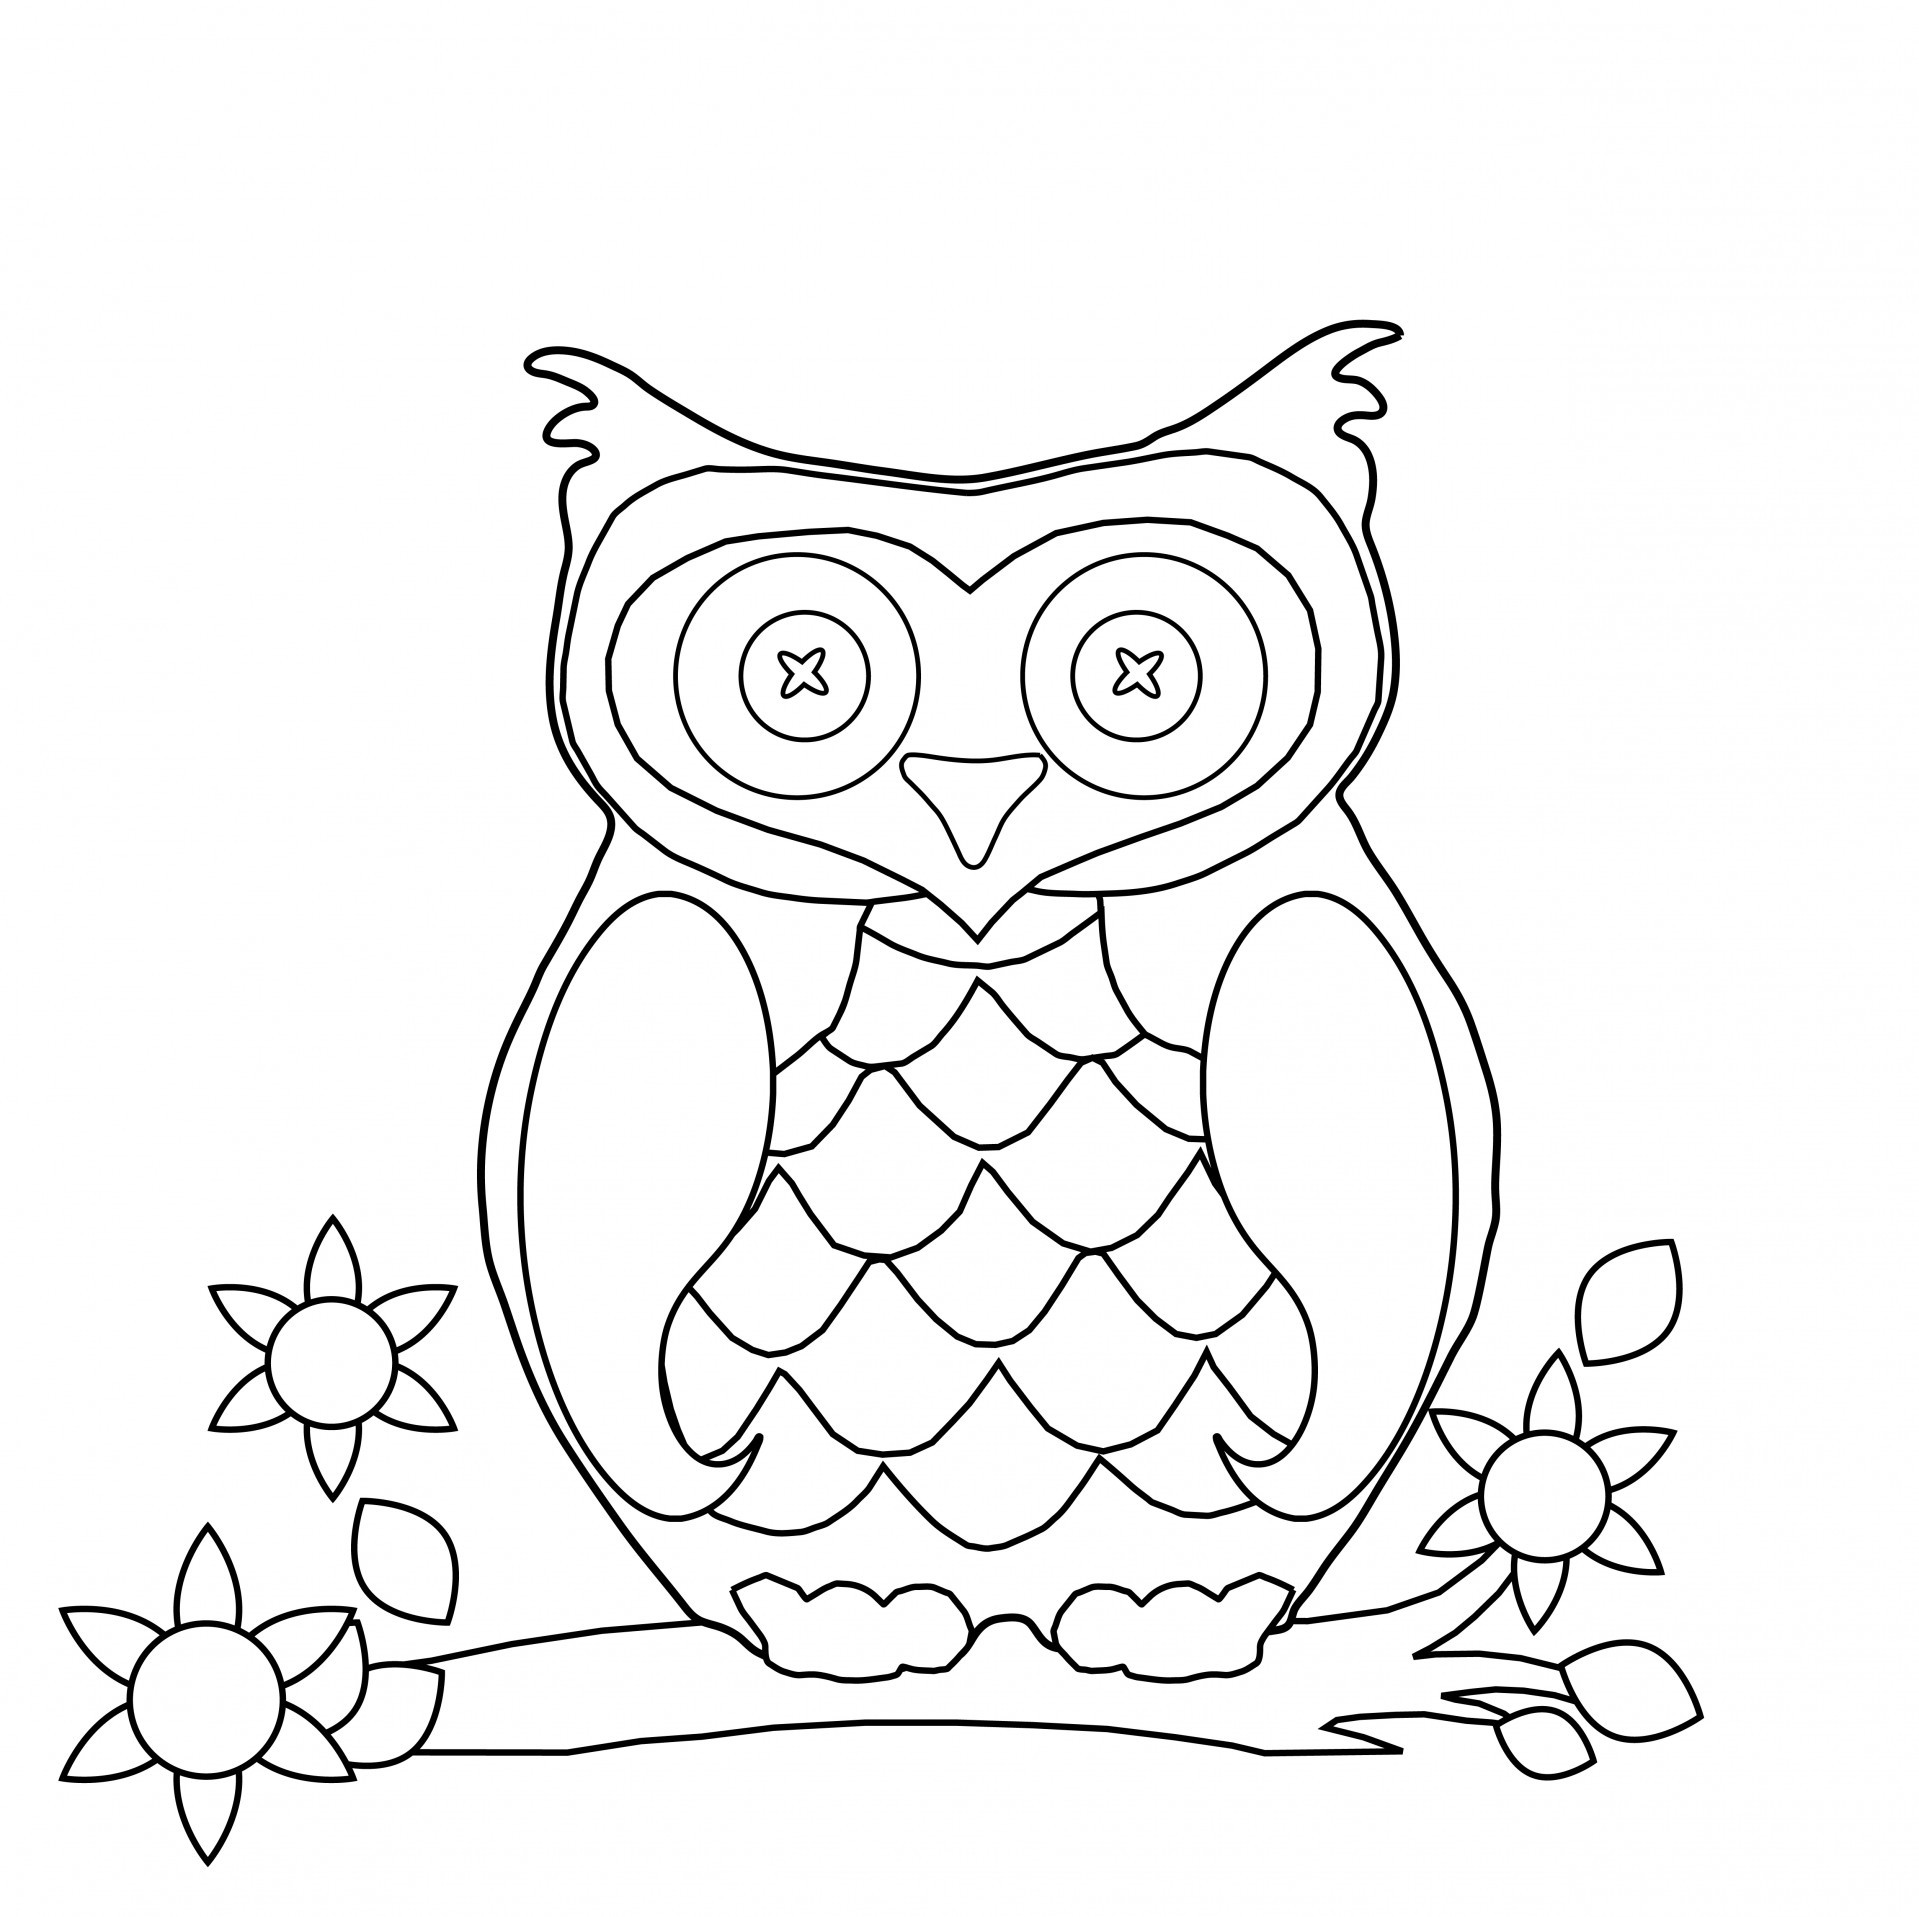 Printable Coloring Pages For Adults
 Free Printable Abstract Coloring Pages for Adults